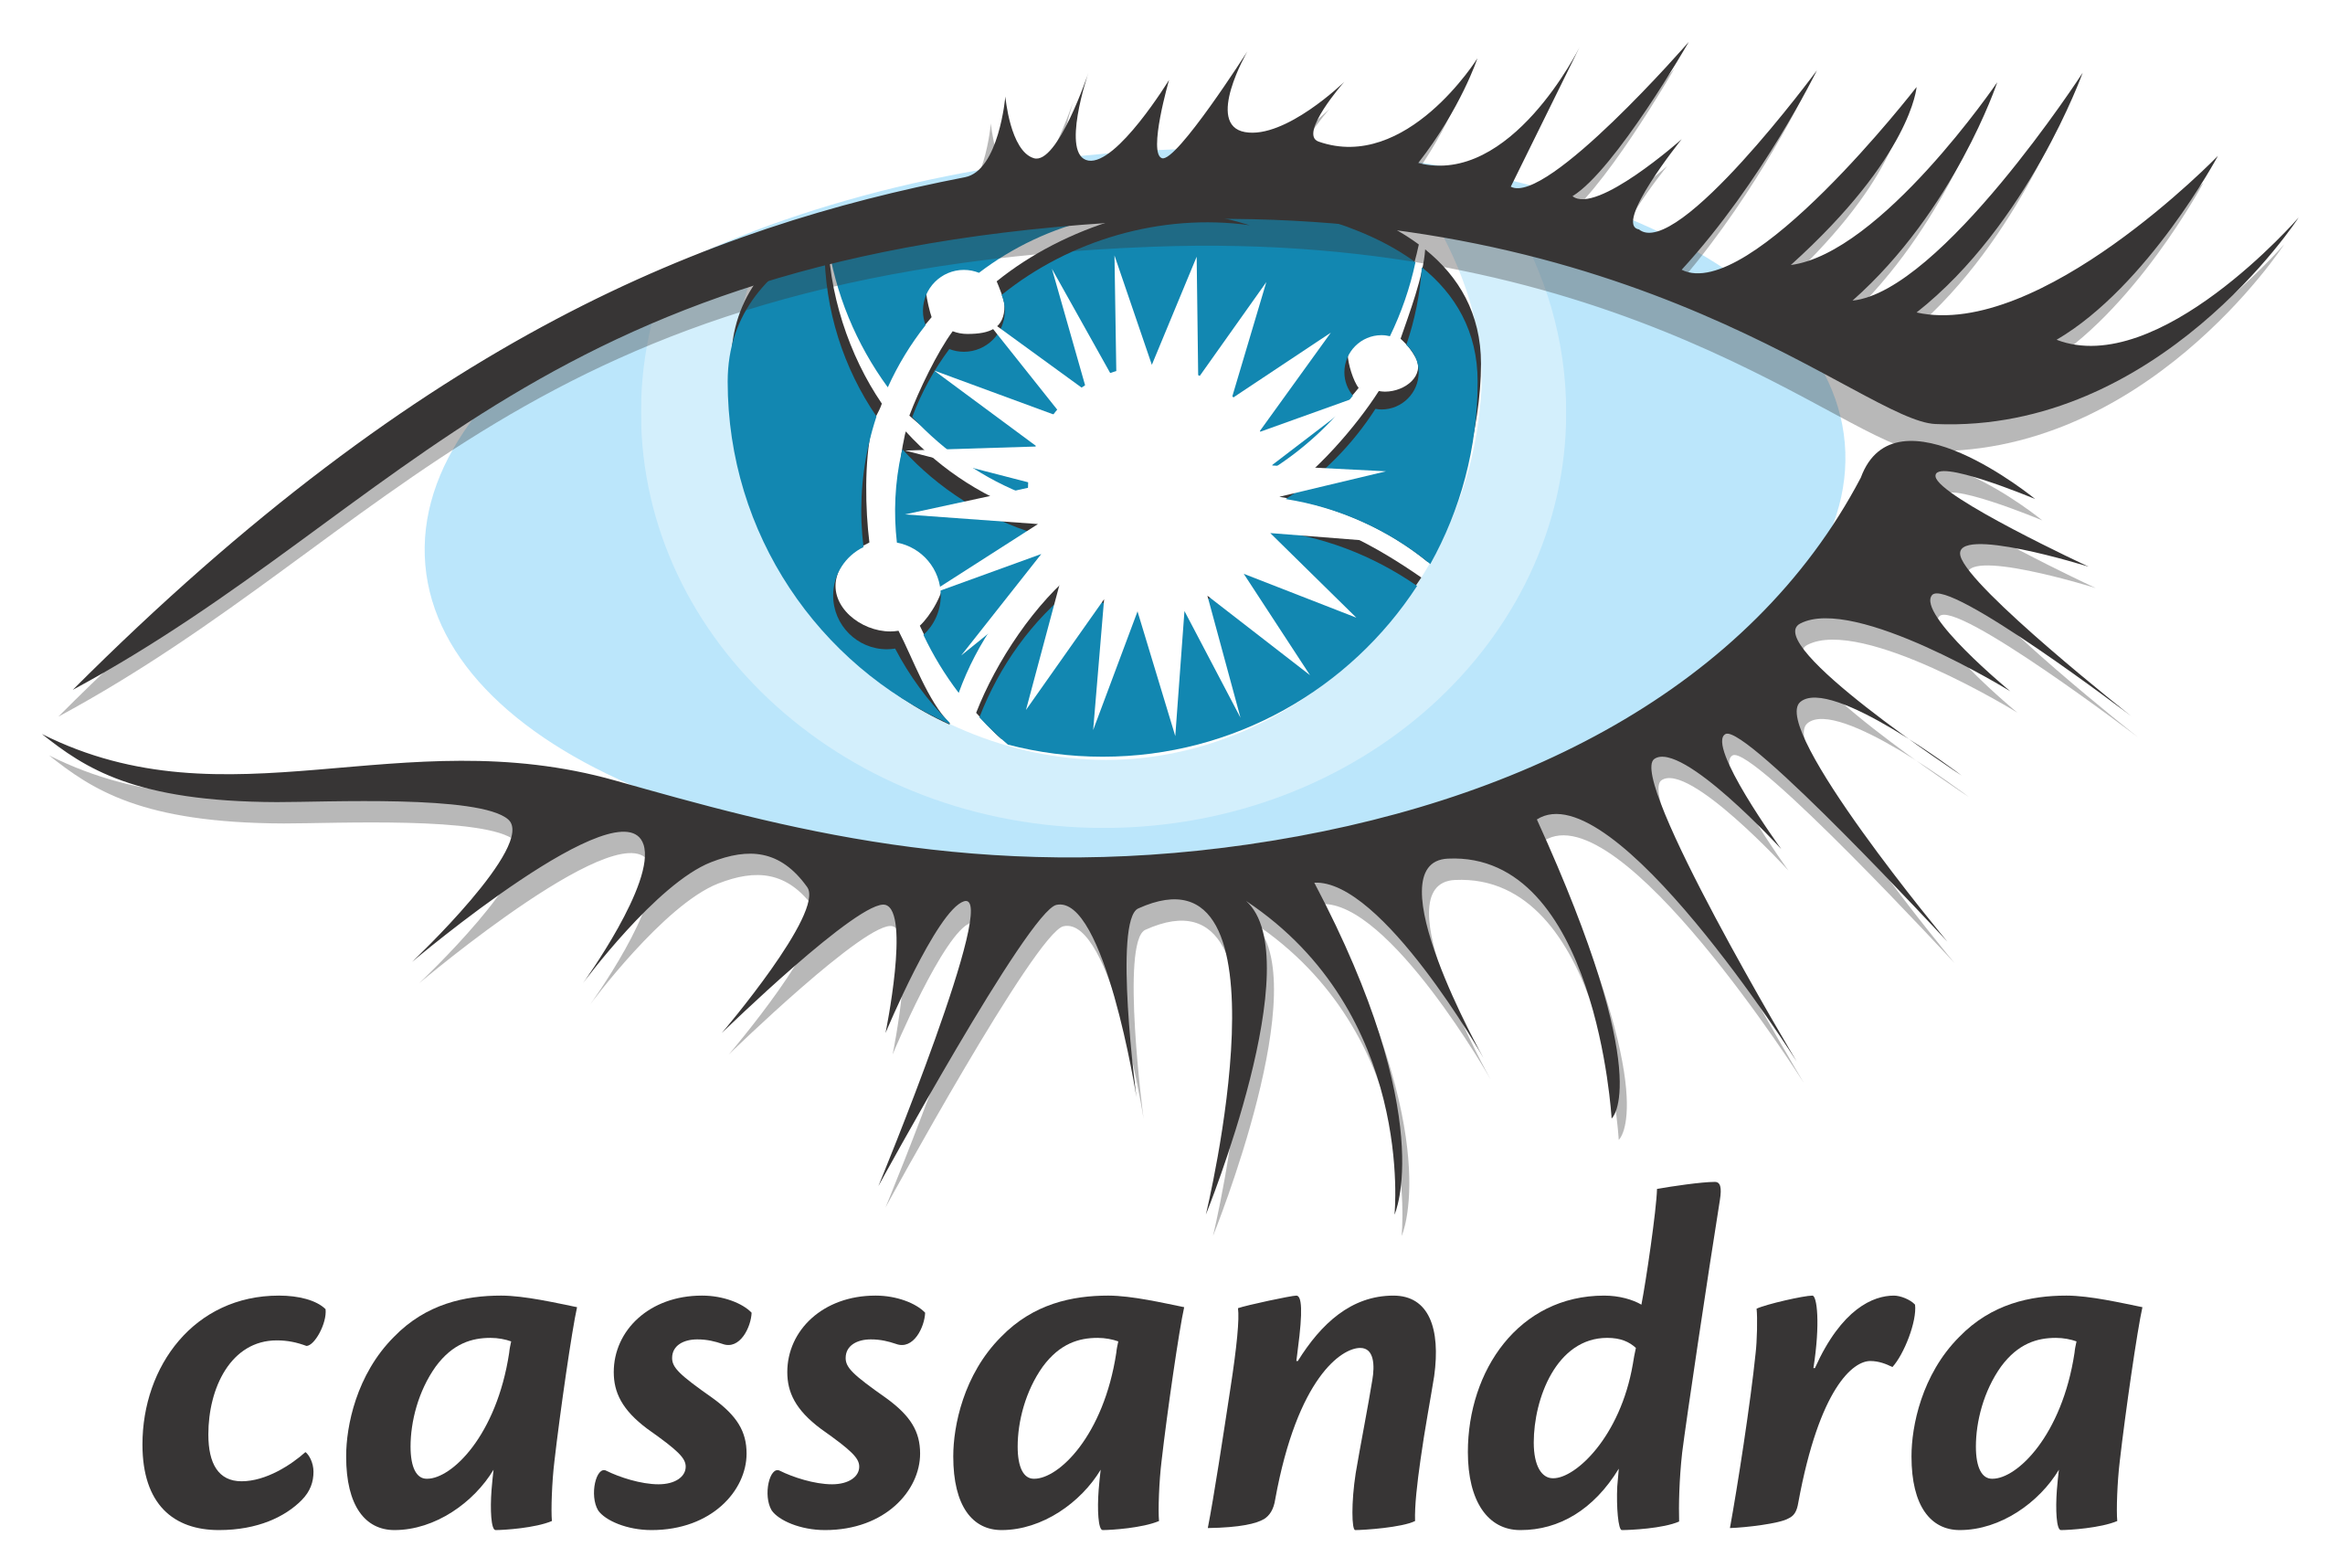 How to Install Cassandra on Linux - Featured